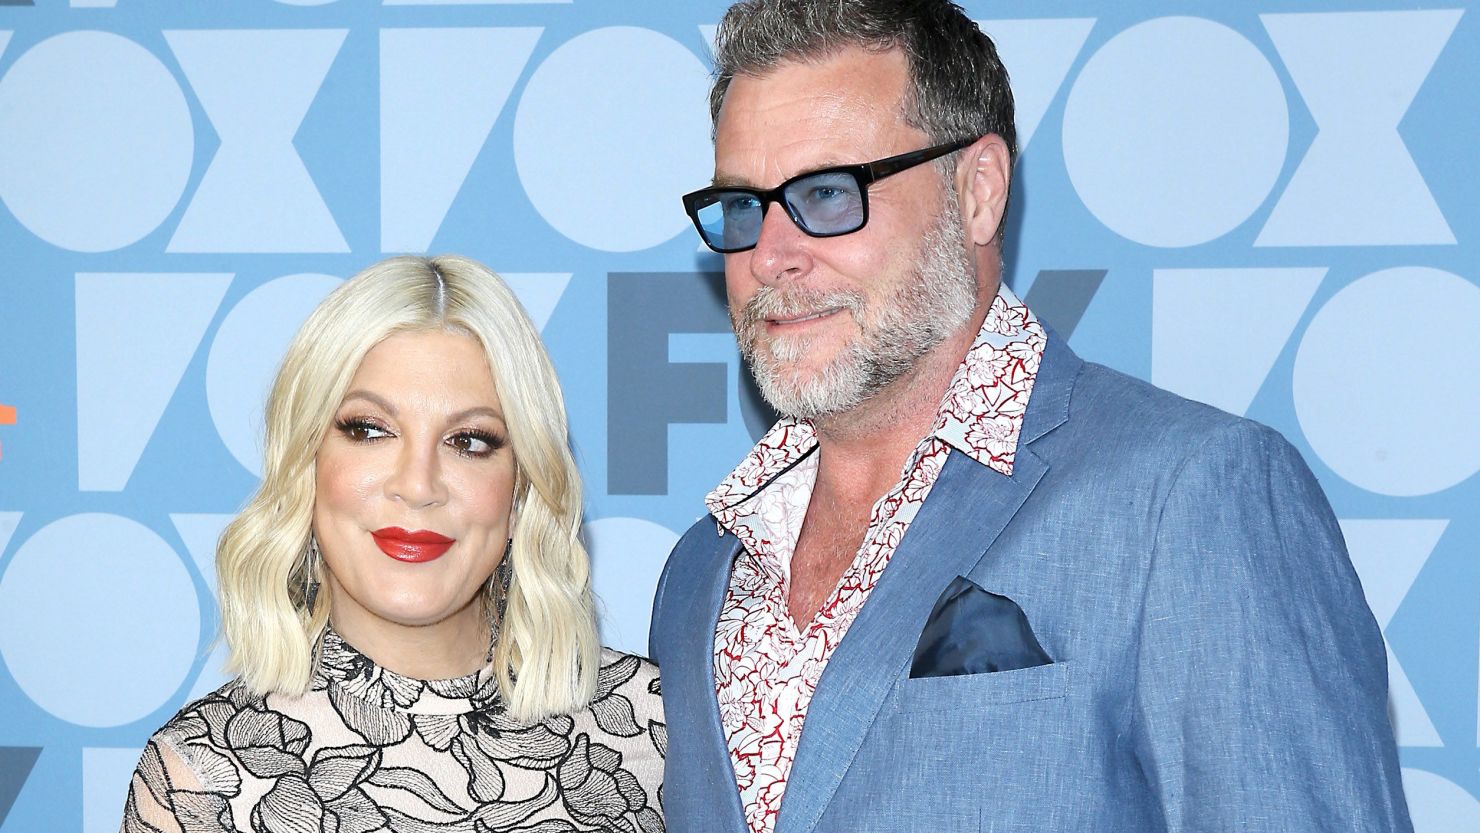 Tori Spelling and her husband Dean McDermott attend the FOX Summer TCA 2019 All-Star Party at Fox Studios on August 7, 2019 in Los Angeles. 